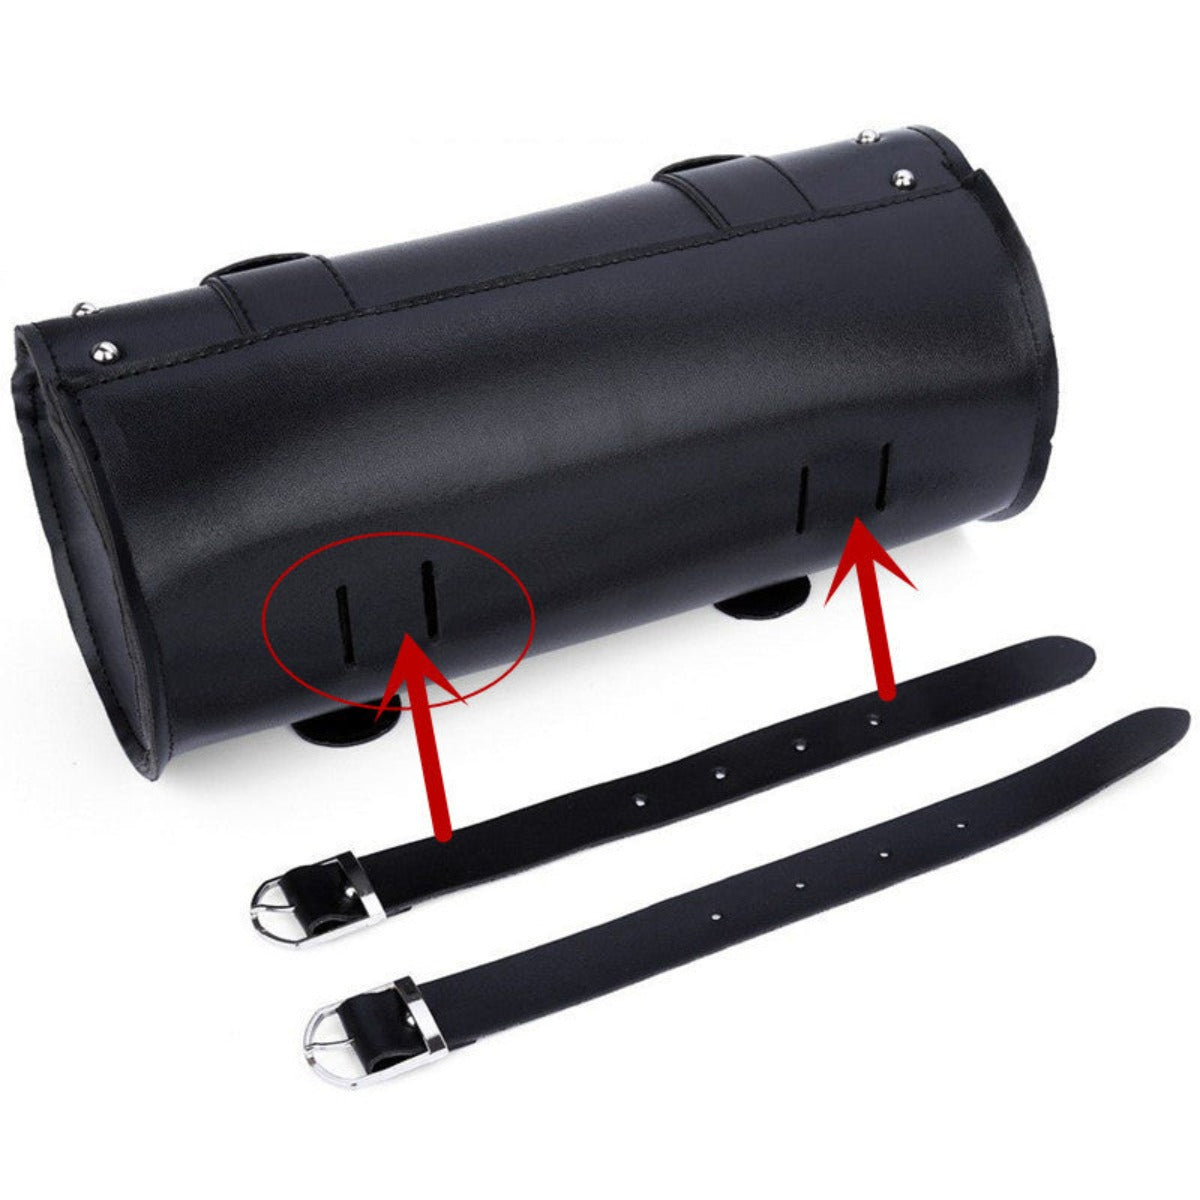 A black Motorcycle Leather Duffle Roll Bag with two straps, perfect as a motorcycle leather tool roll bag.